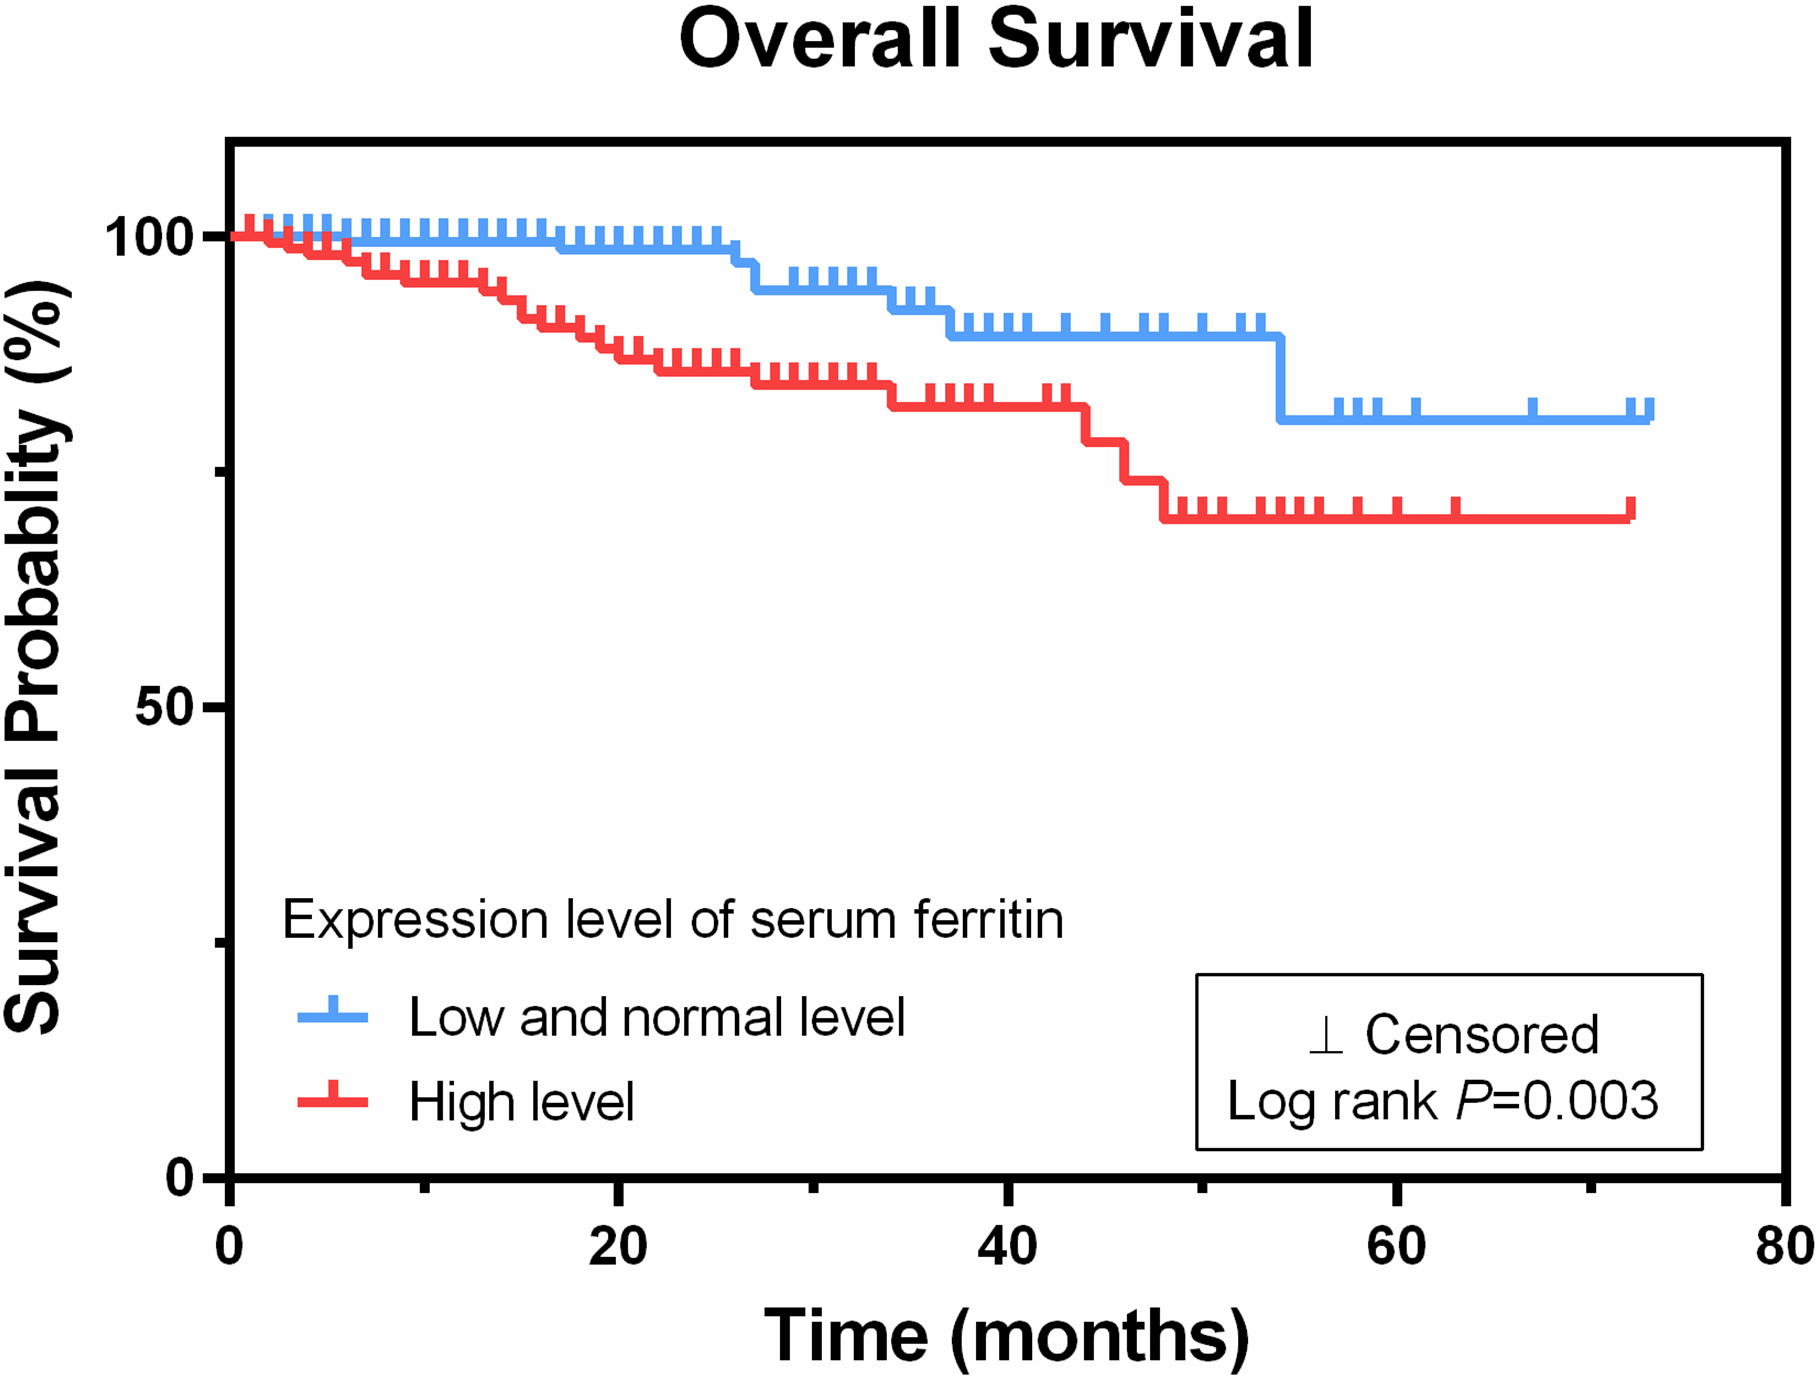 High serum ferritin expression level in gynecological malignancies correlates with poor overall survival. The Kaplan-Meier survival curve for 402 patients revealed that the high ferritin level group (> 150 μg/L) had significantly less overall survival time when compared to the low and normal ferritin level groups (⩽ 150 μg/L) (log-rank P= 0.003).